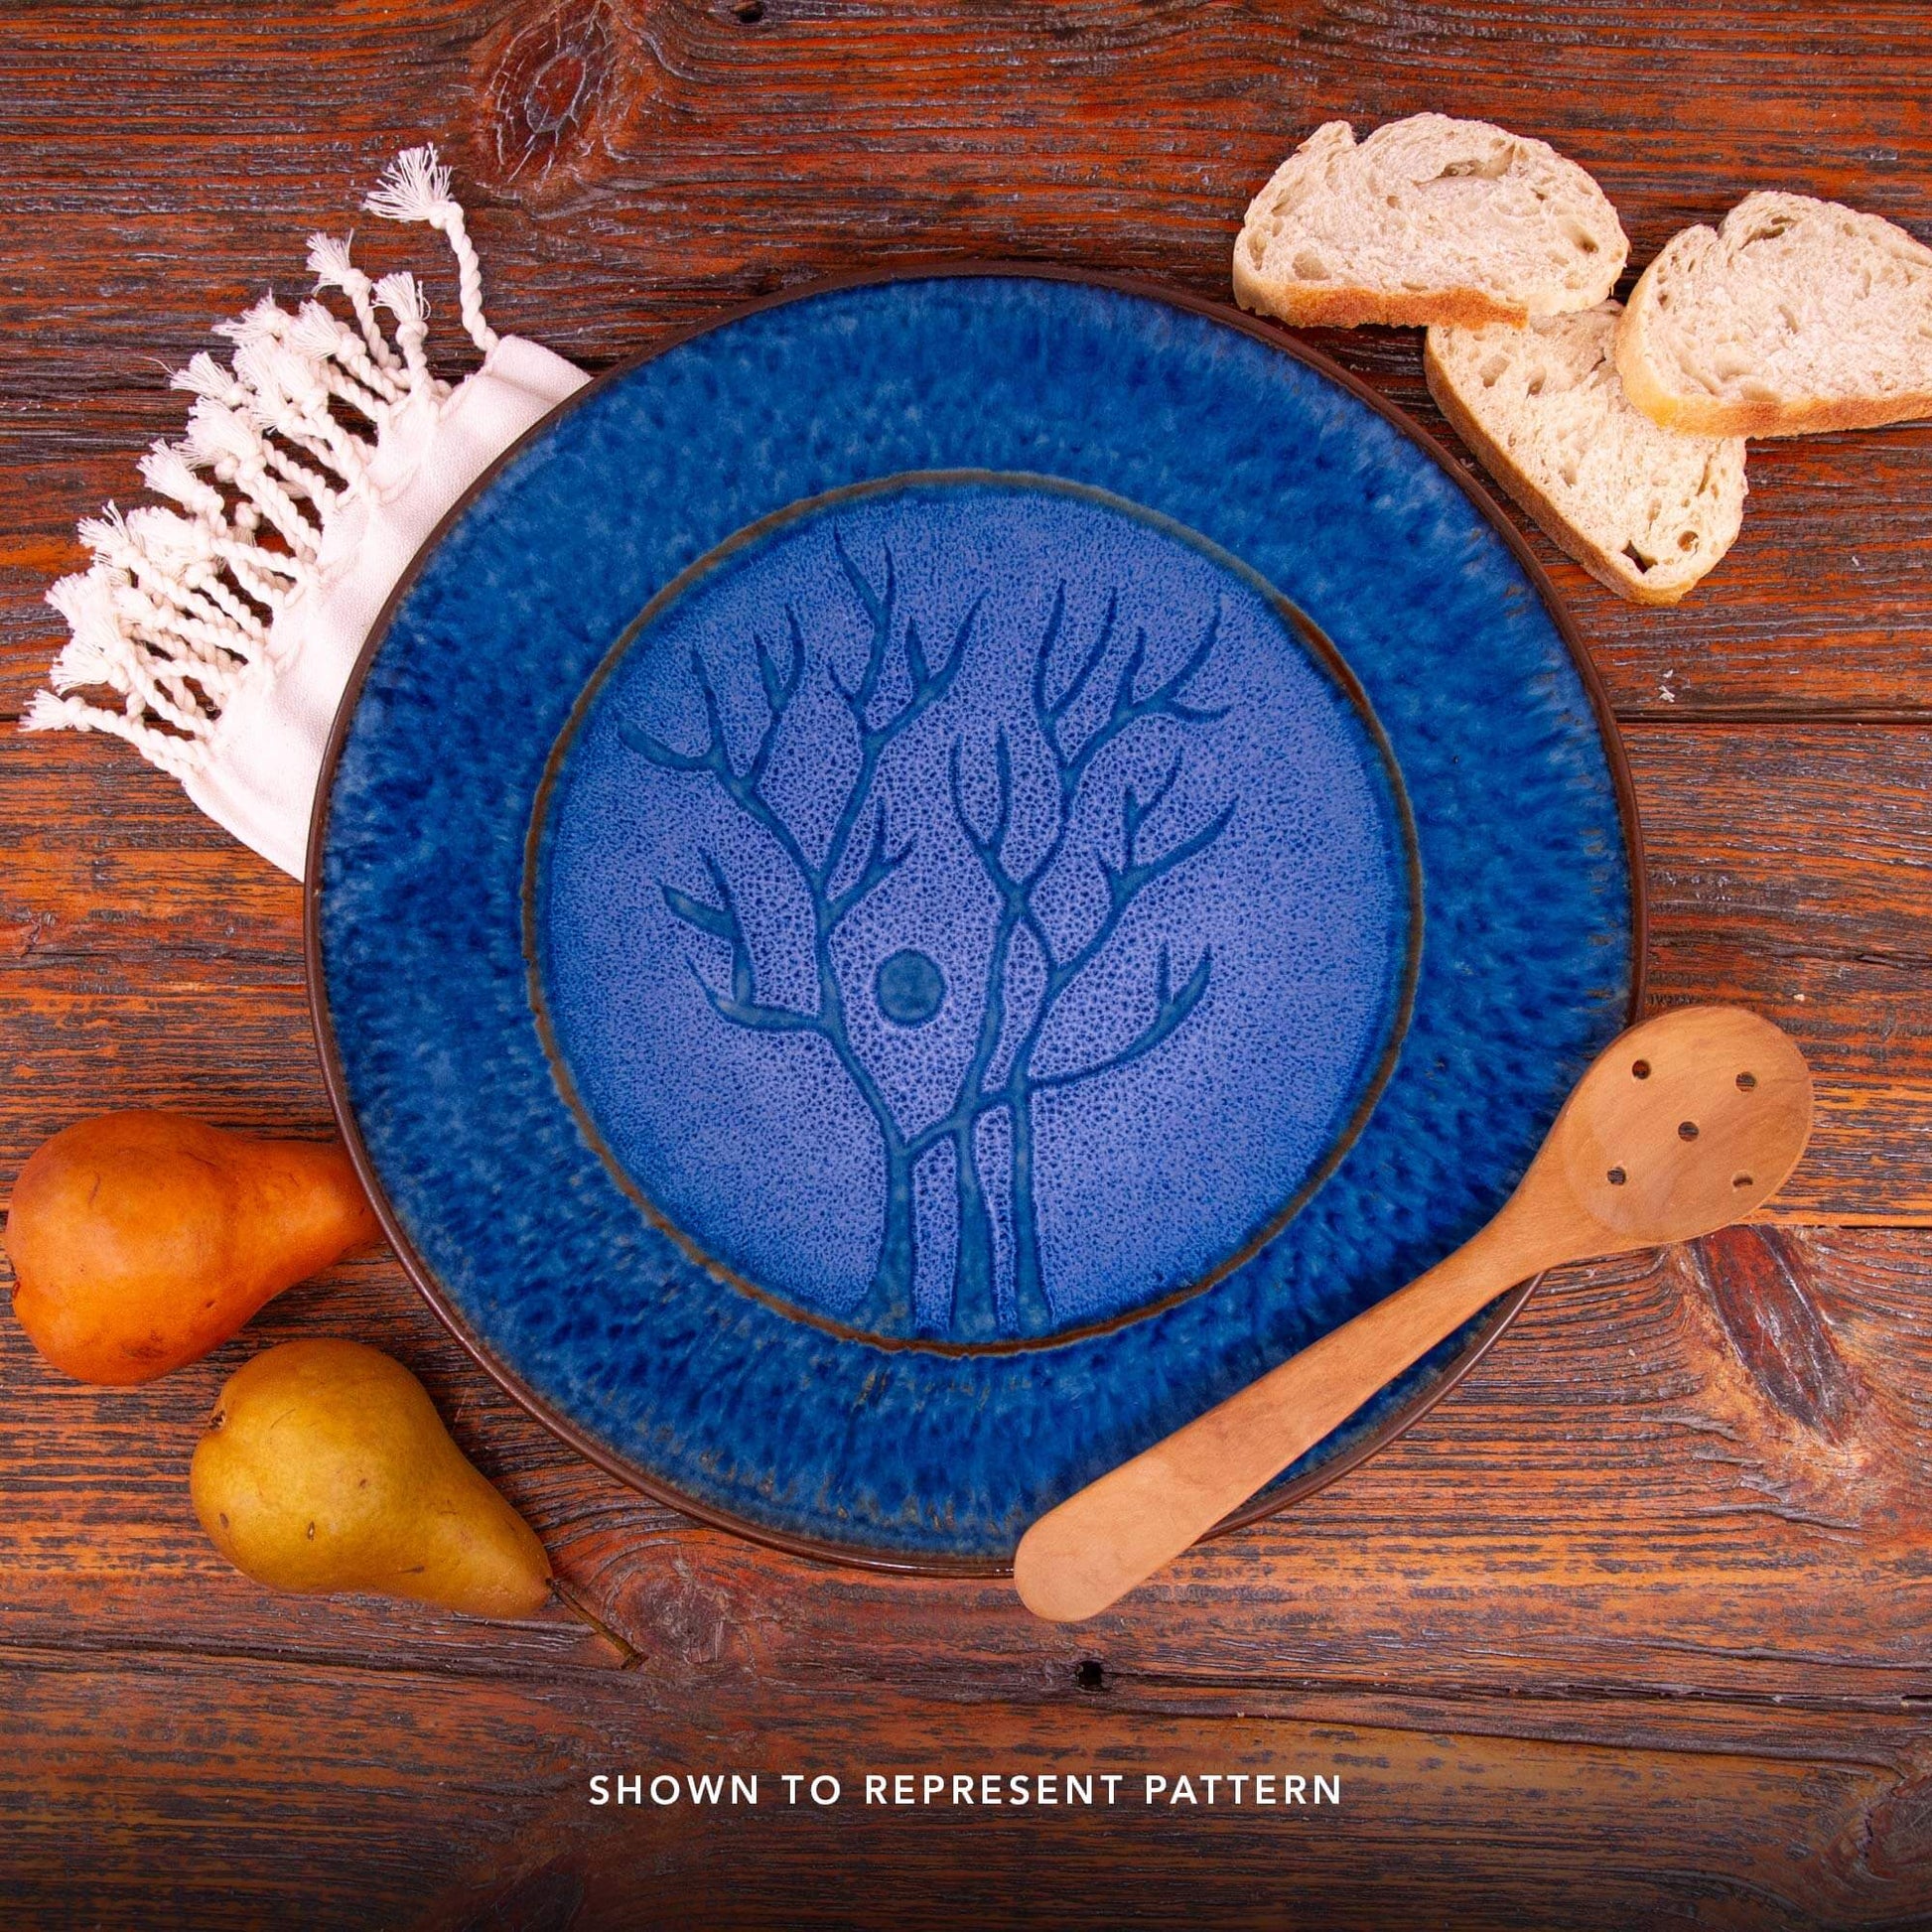 Handmade Pottery Oval Platter in Blue Tree pattern made by Georgetown Pottery in Maine